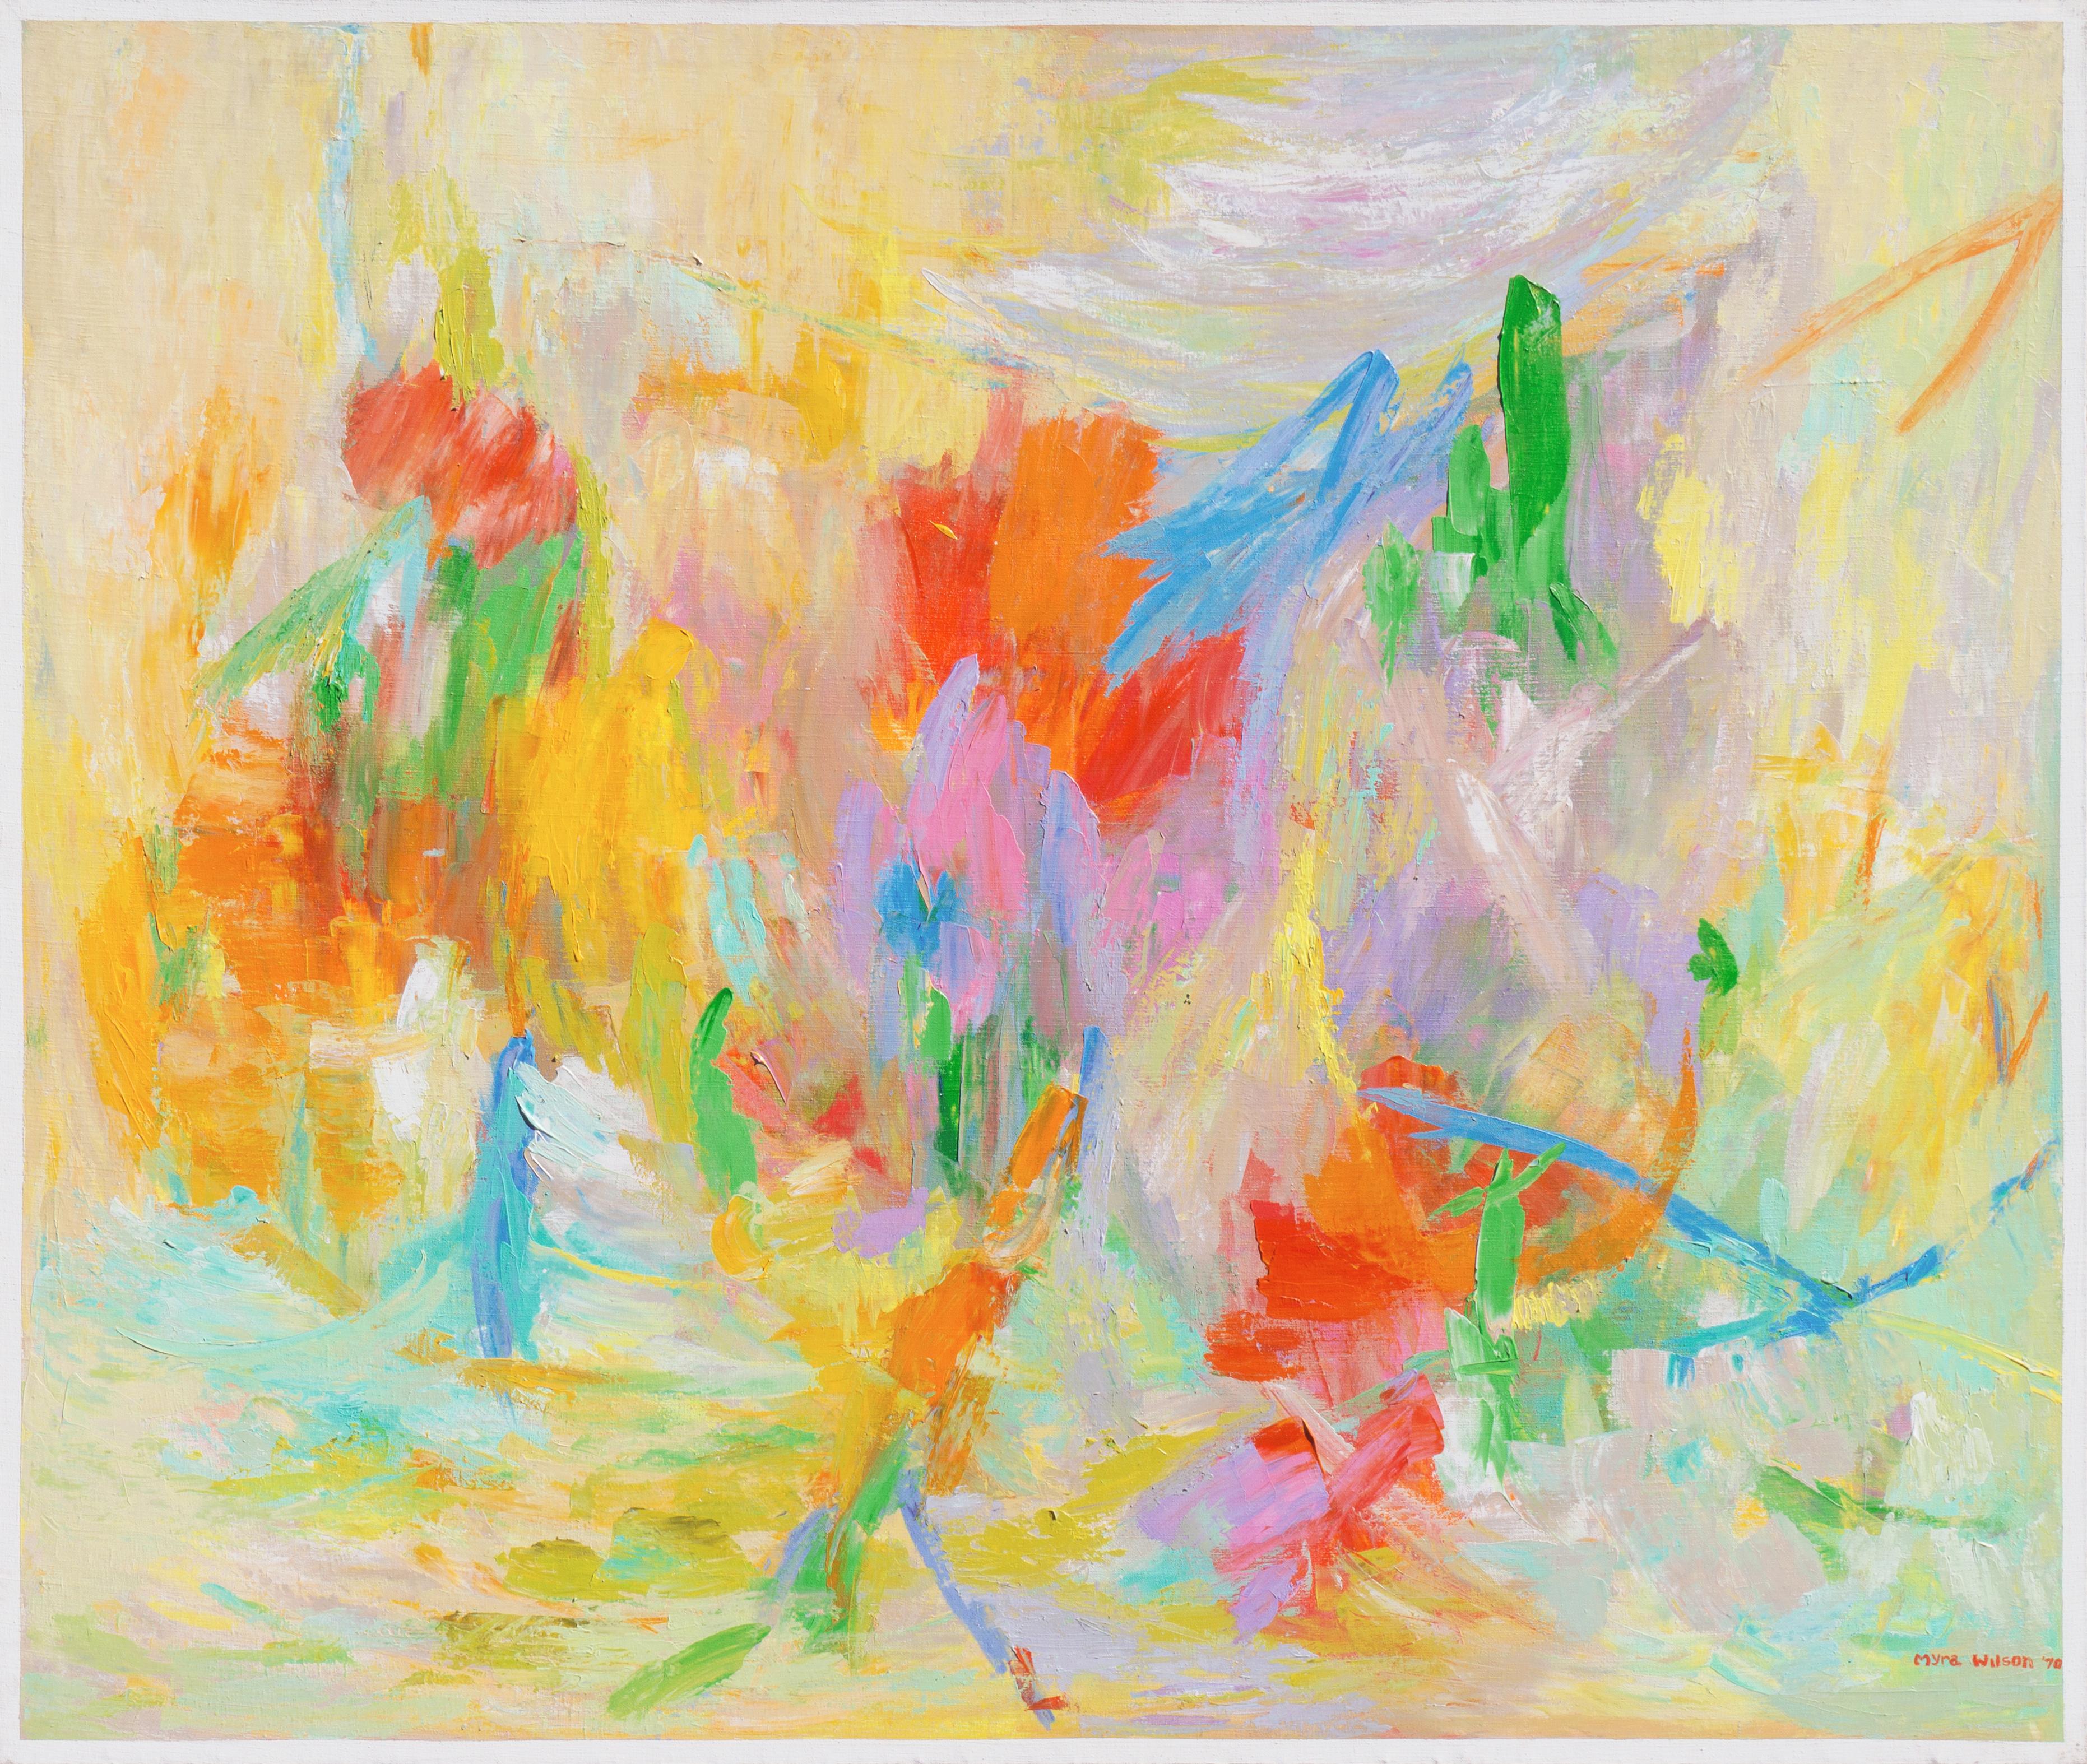 Action Abstract (Abstract Expressionism, Red, Blue, Green, Yellow) - Painting by Myra Wilson